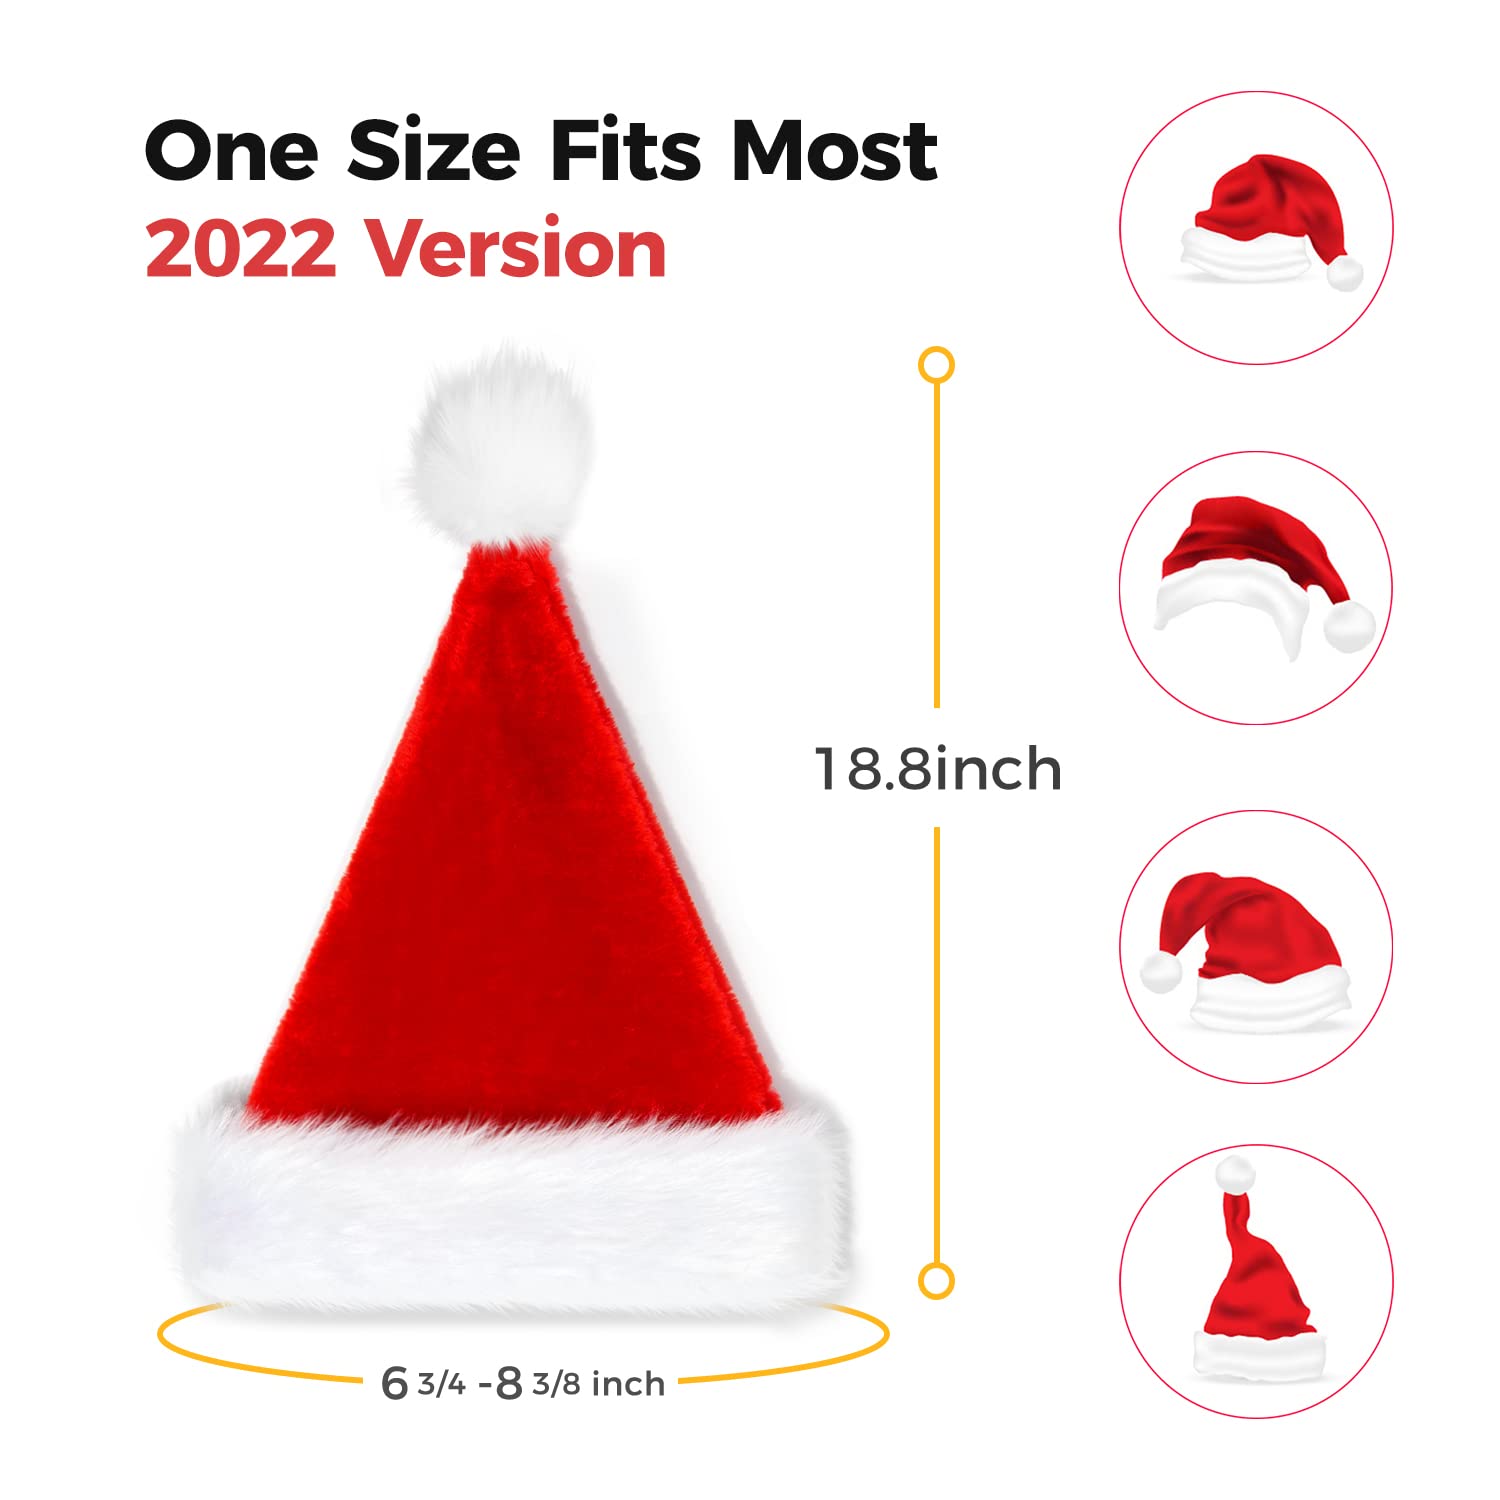 eCraftIndia Red and White Velvet Classic Fur Merry Christmas Hats, Santa Claus Caps for kids and Adults - XMAS Caps, Santa Hats for Christmas, New Year, Festive Holiday Party Celebration (Set of 12) 7